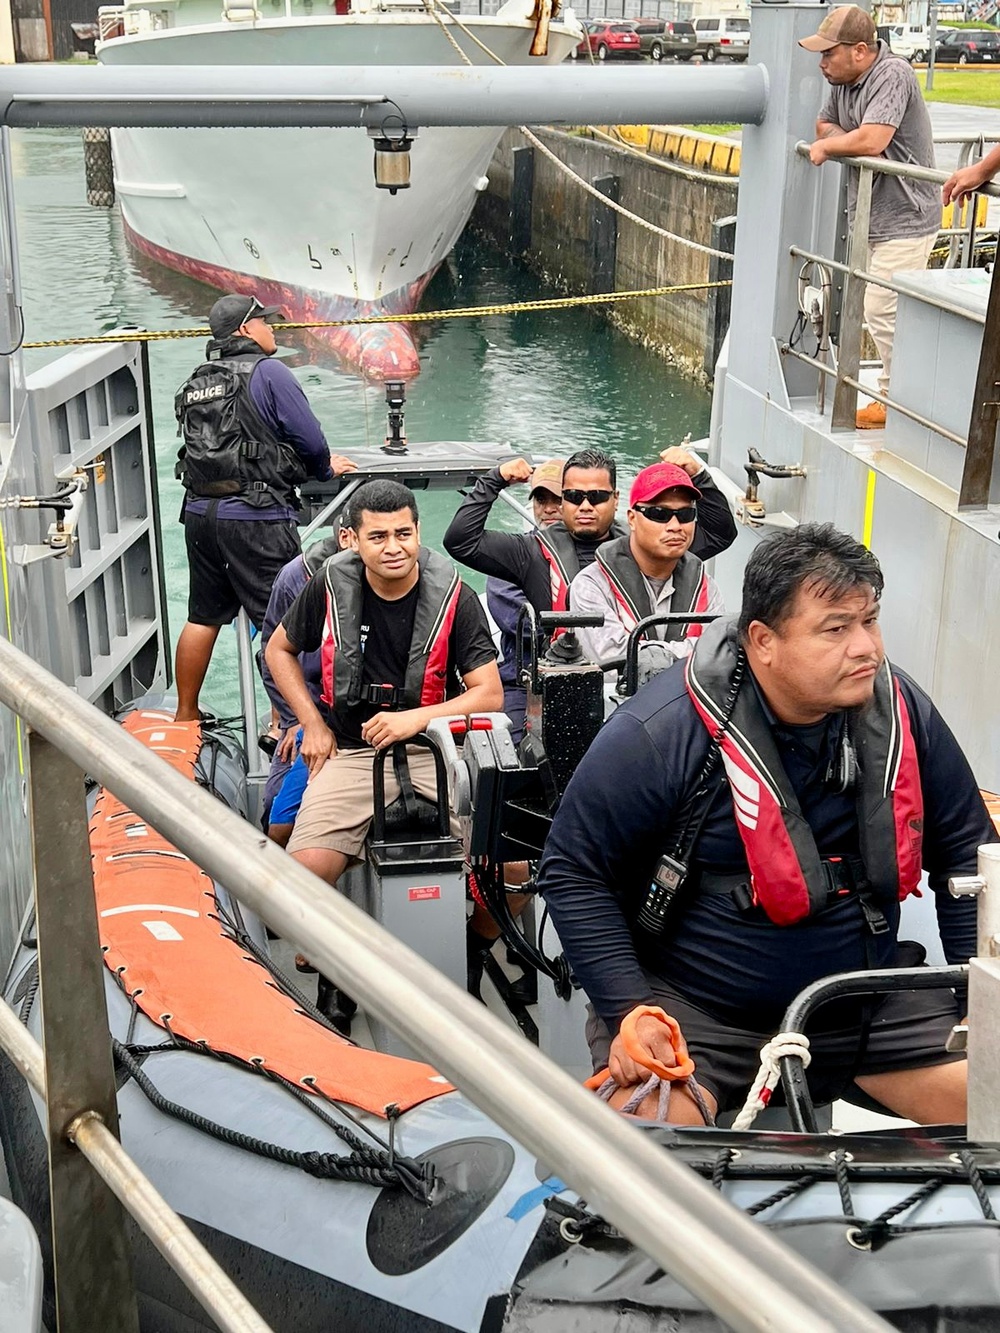 U.S. Coast Guard, Federated States of Micronesia strengthen Search and Rescue capabilities through joint training exercise